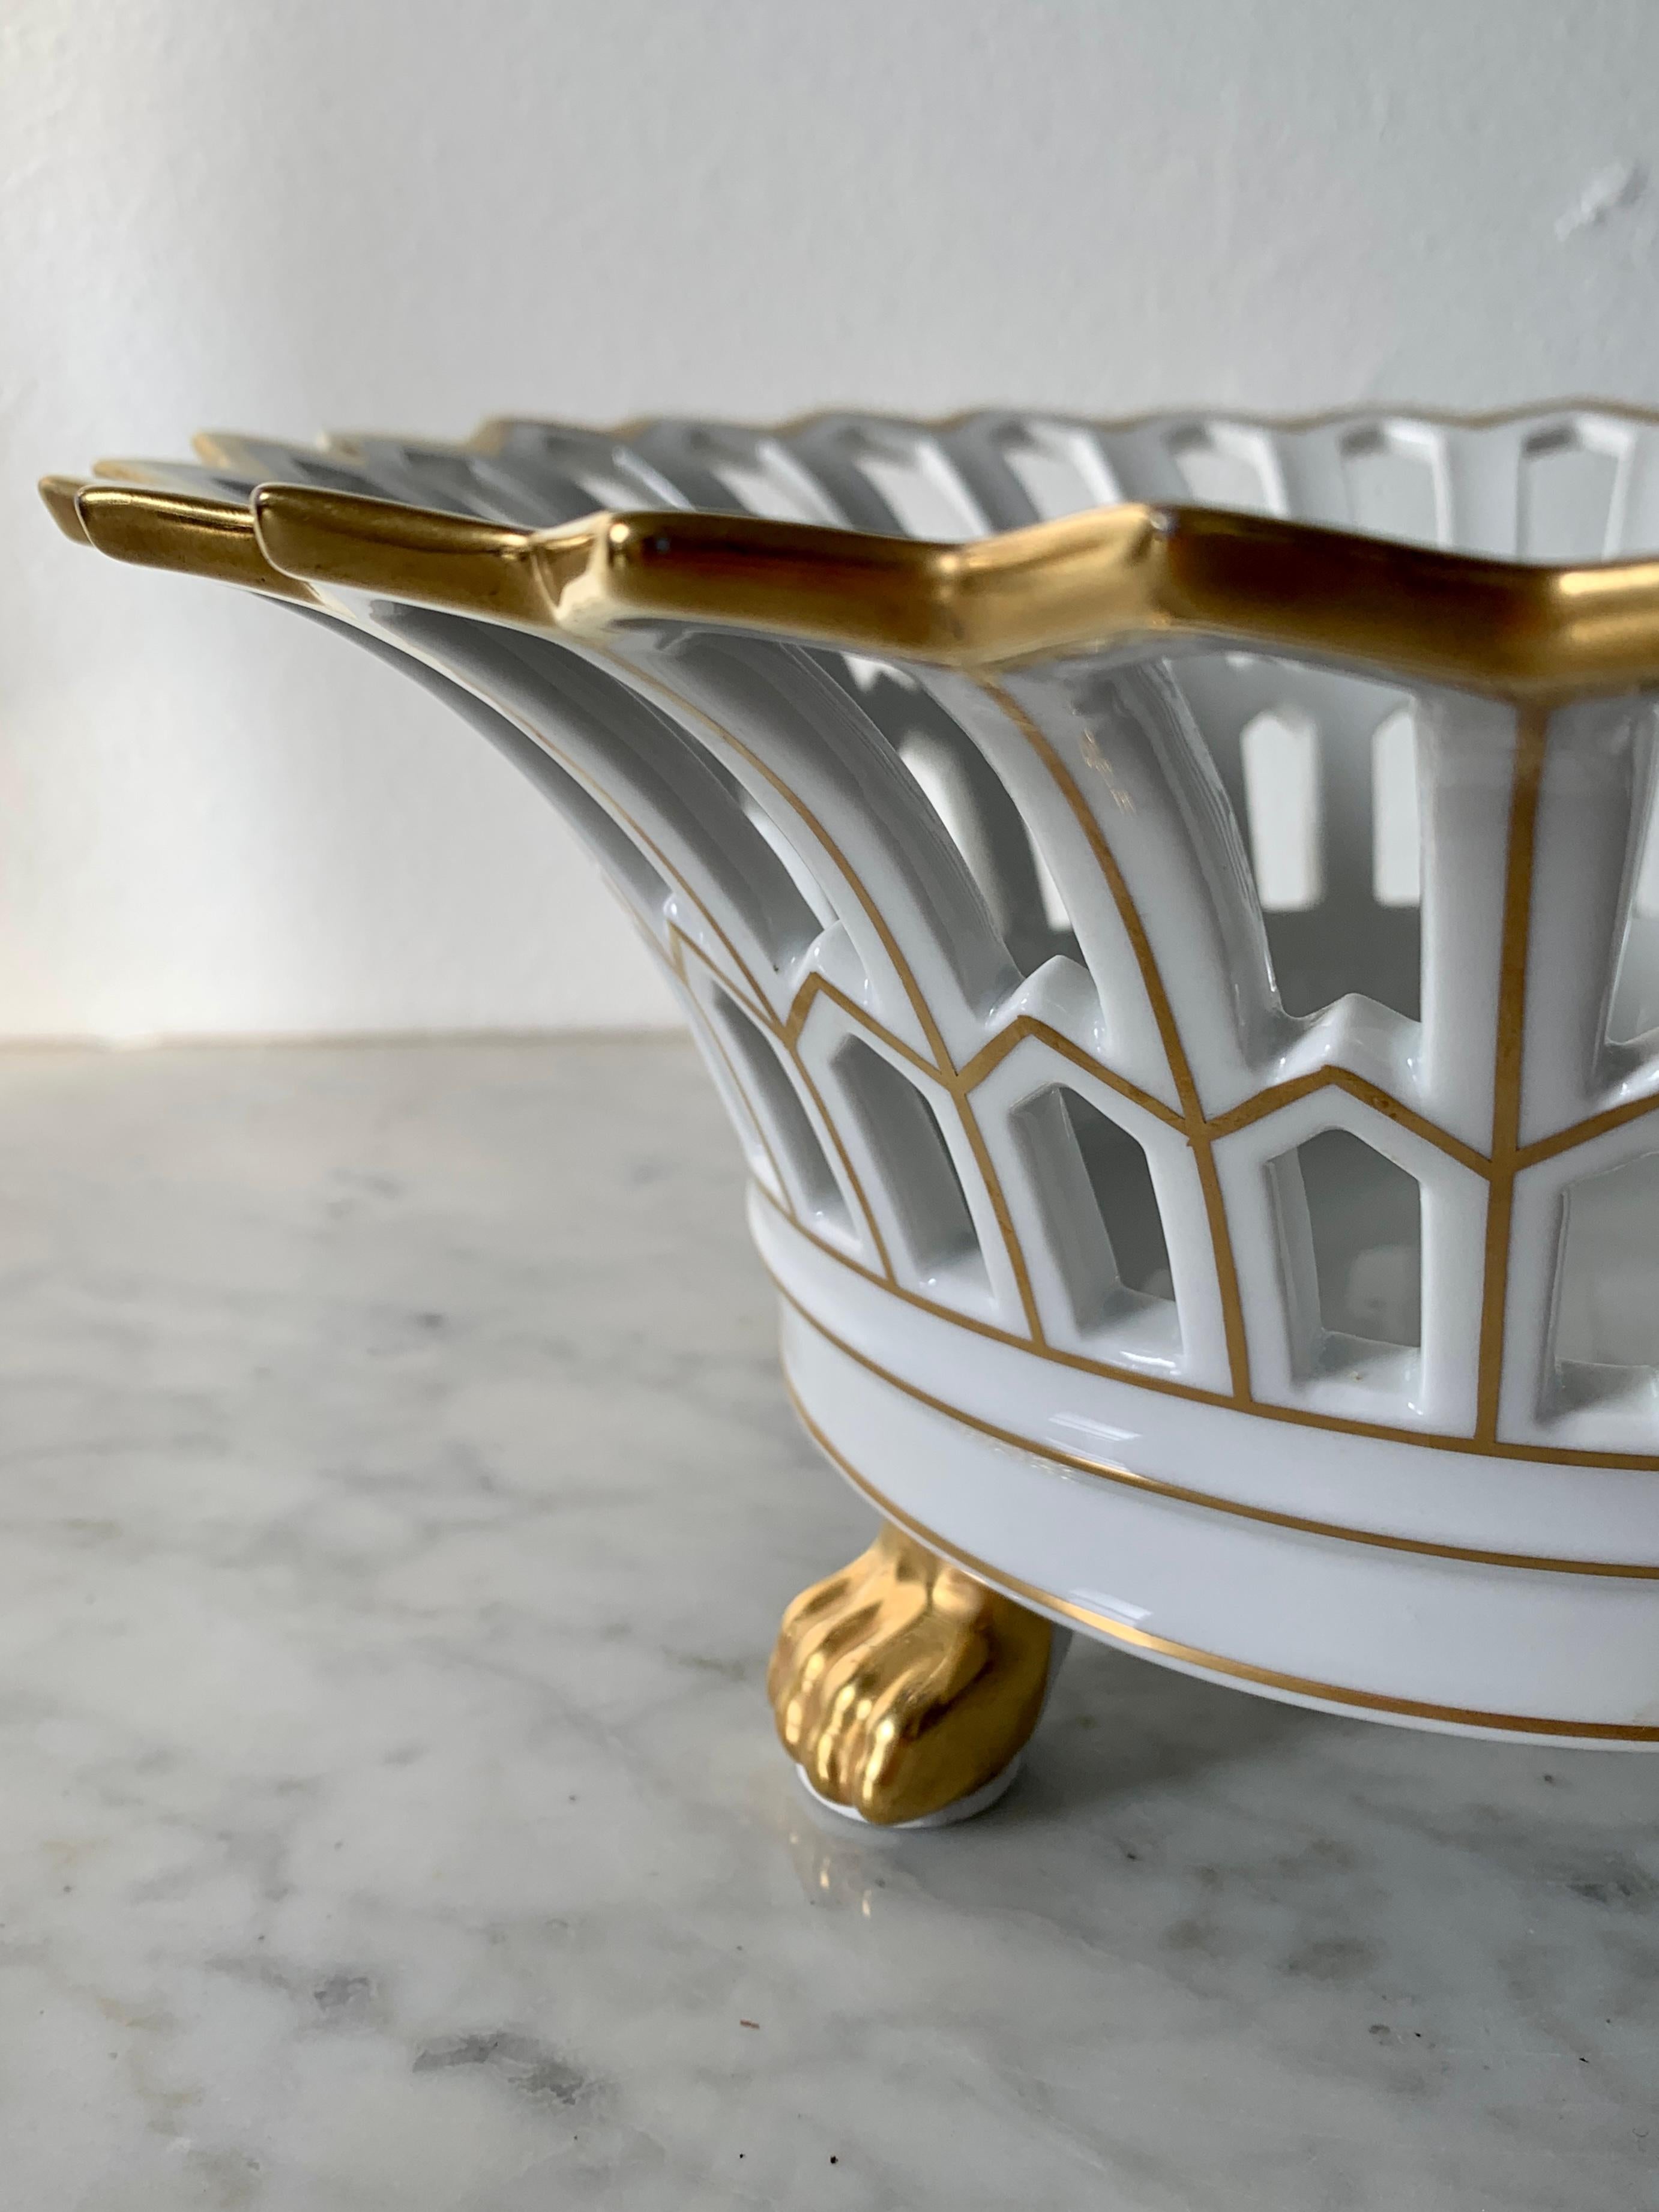 Portuguese Reticulated Gold Gilt Porcelain Lion Paw Footed Basket In Good Condition For Sale In Elkhart, IN